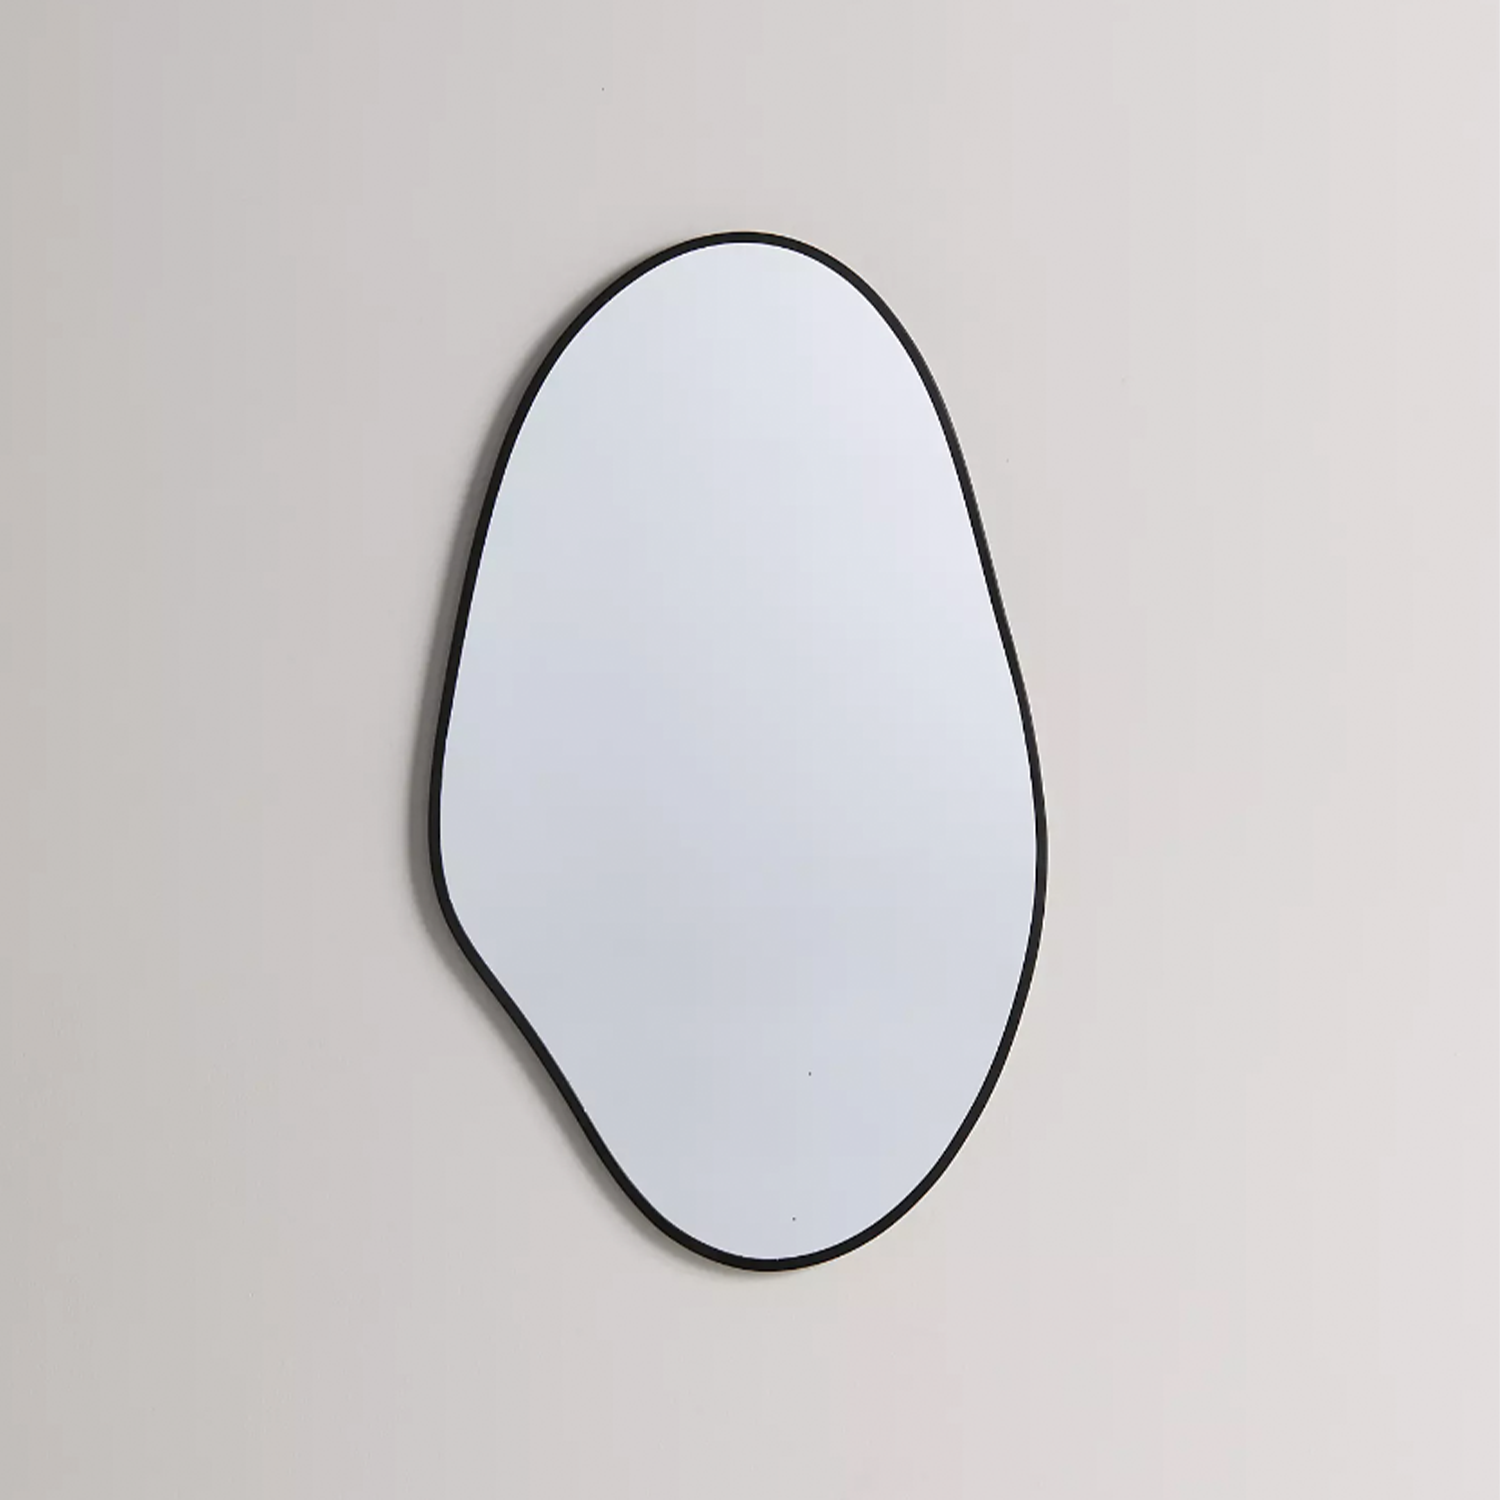 Blob wall mirror from Urban Outfitters